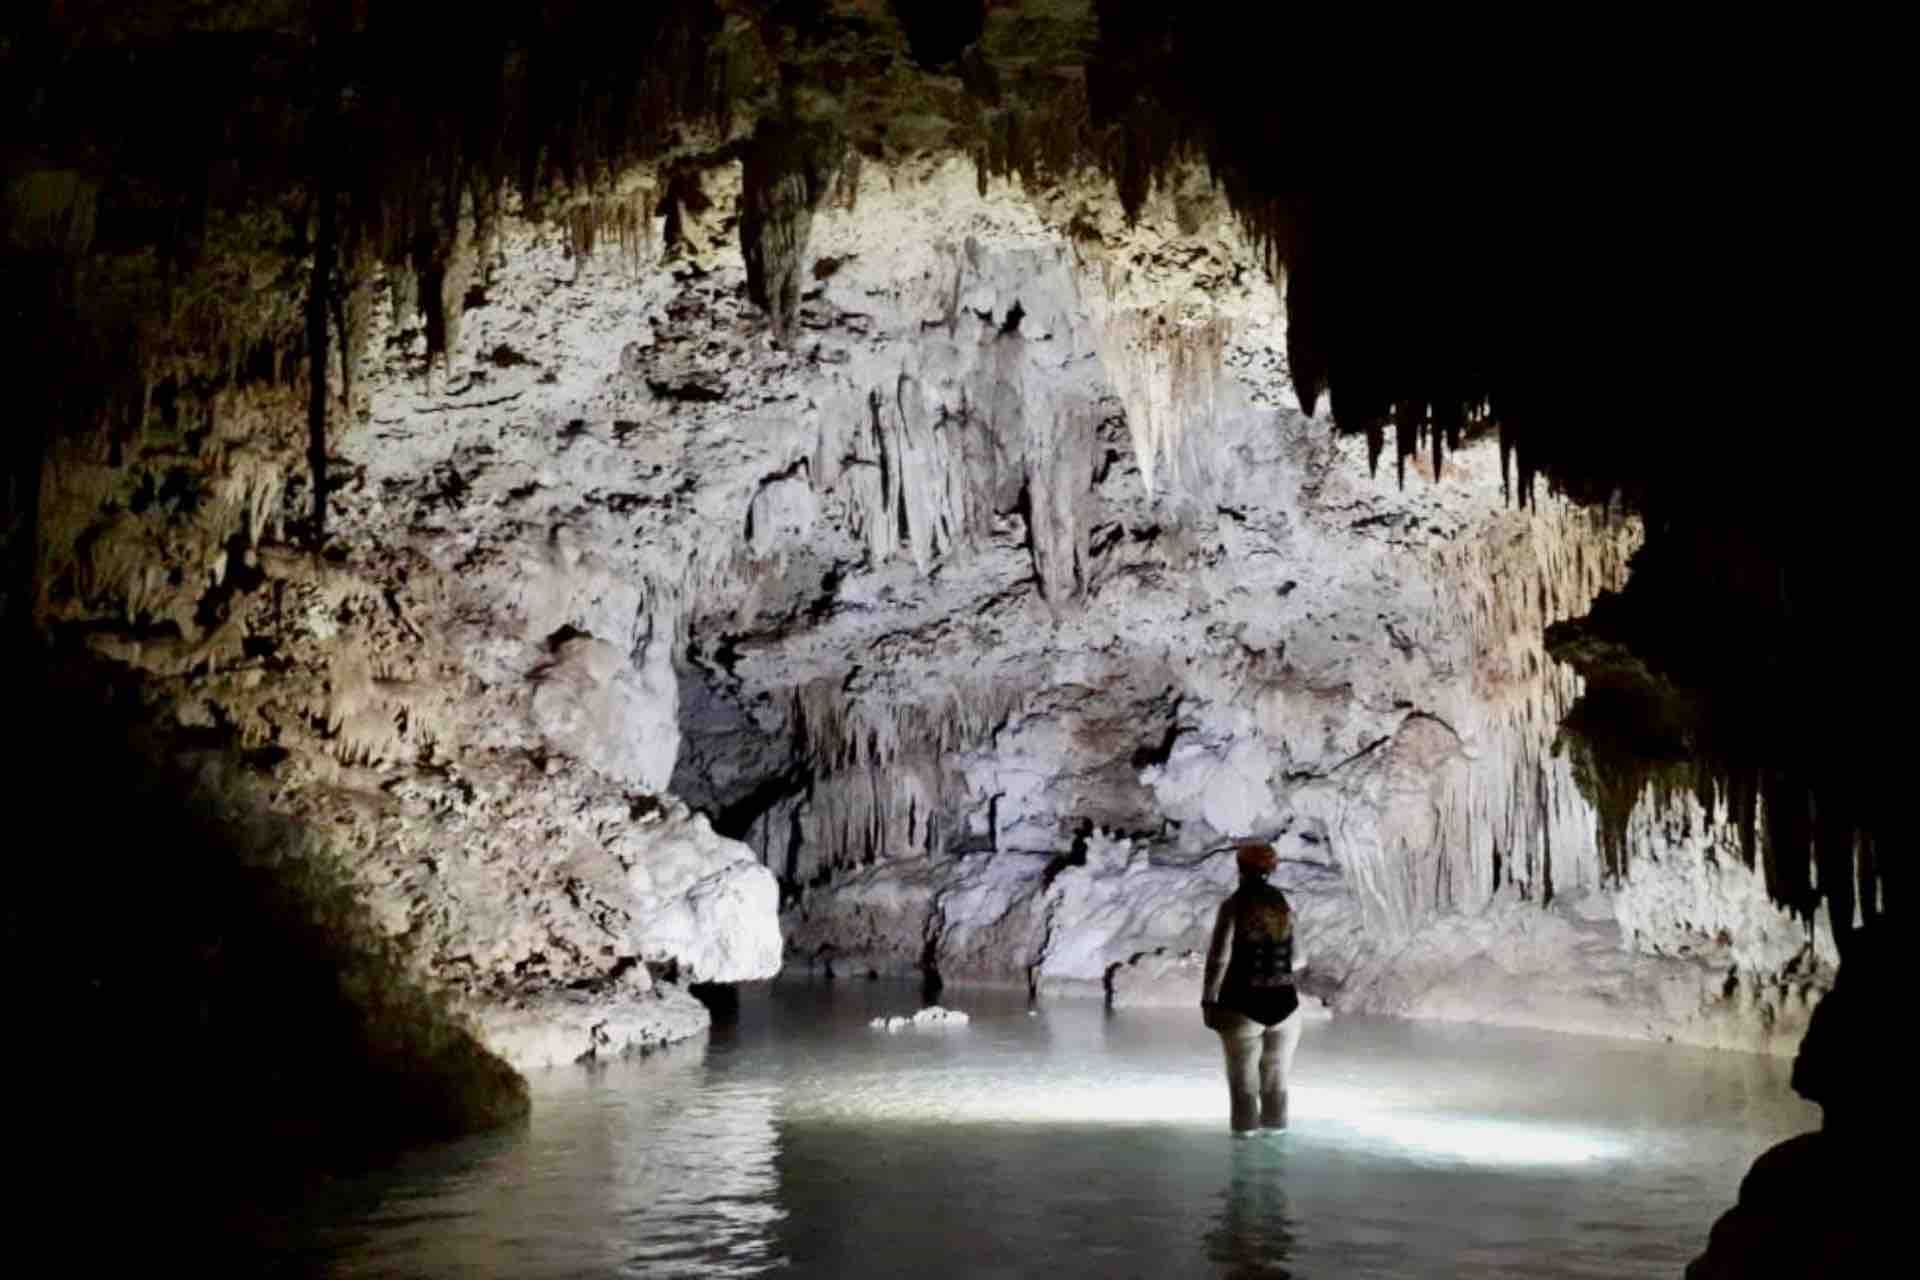 Mexico Cenote guest looking at stalactites